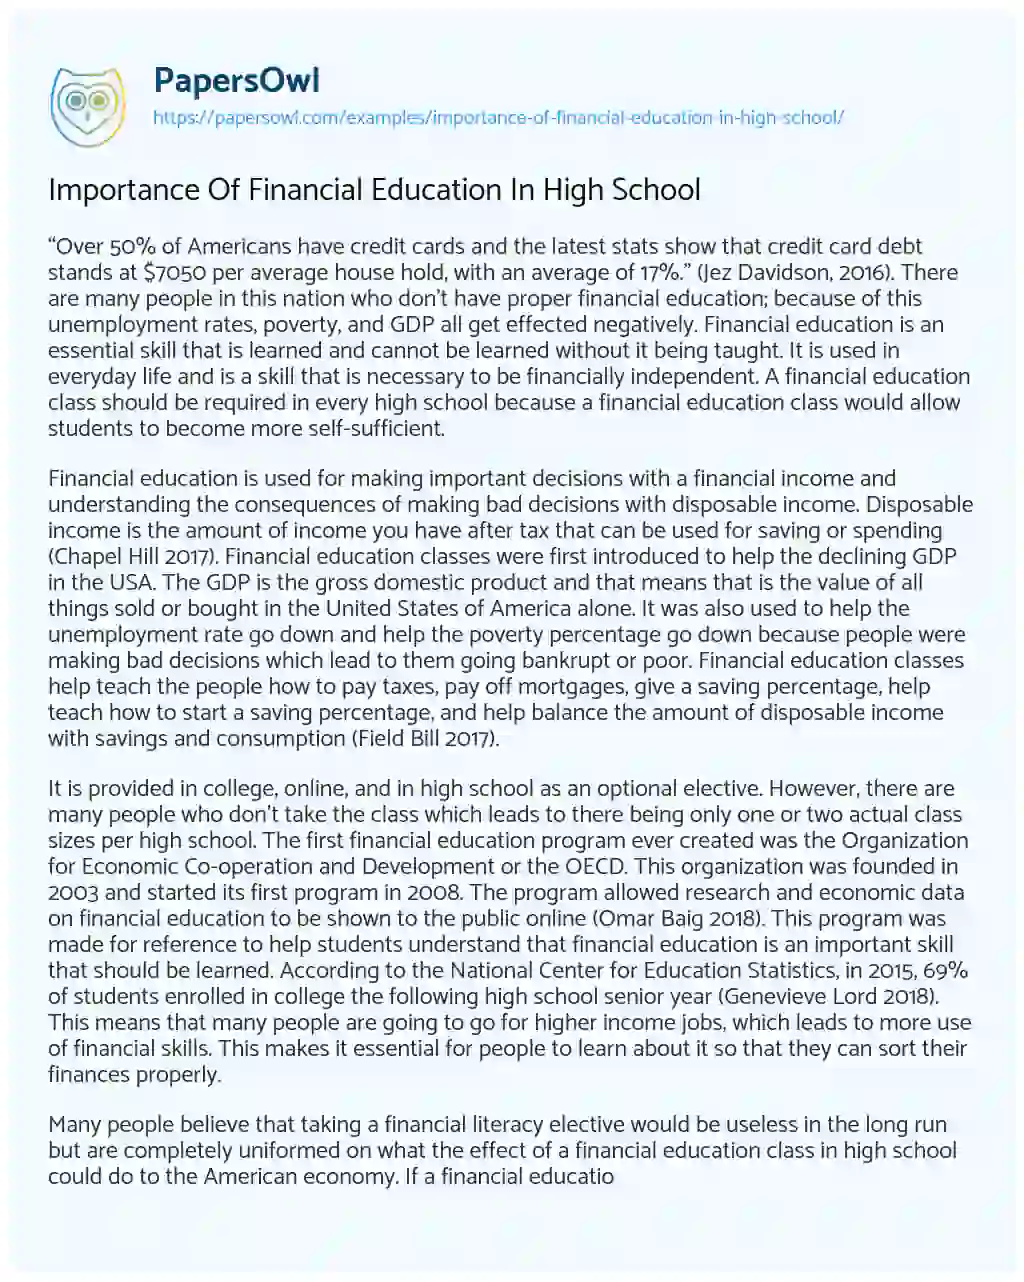 Essay on Importance of Financial Education in High School